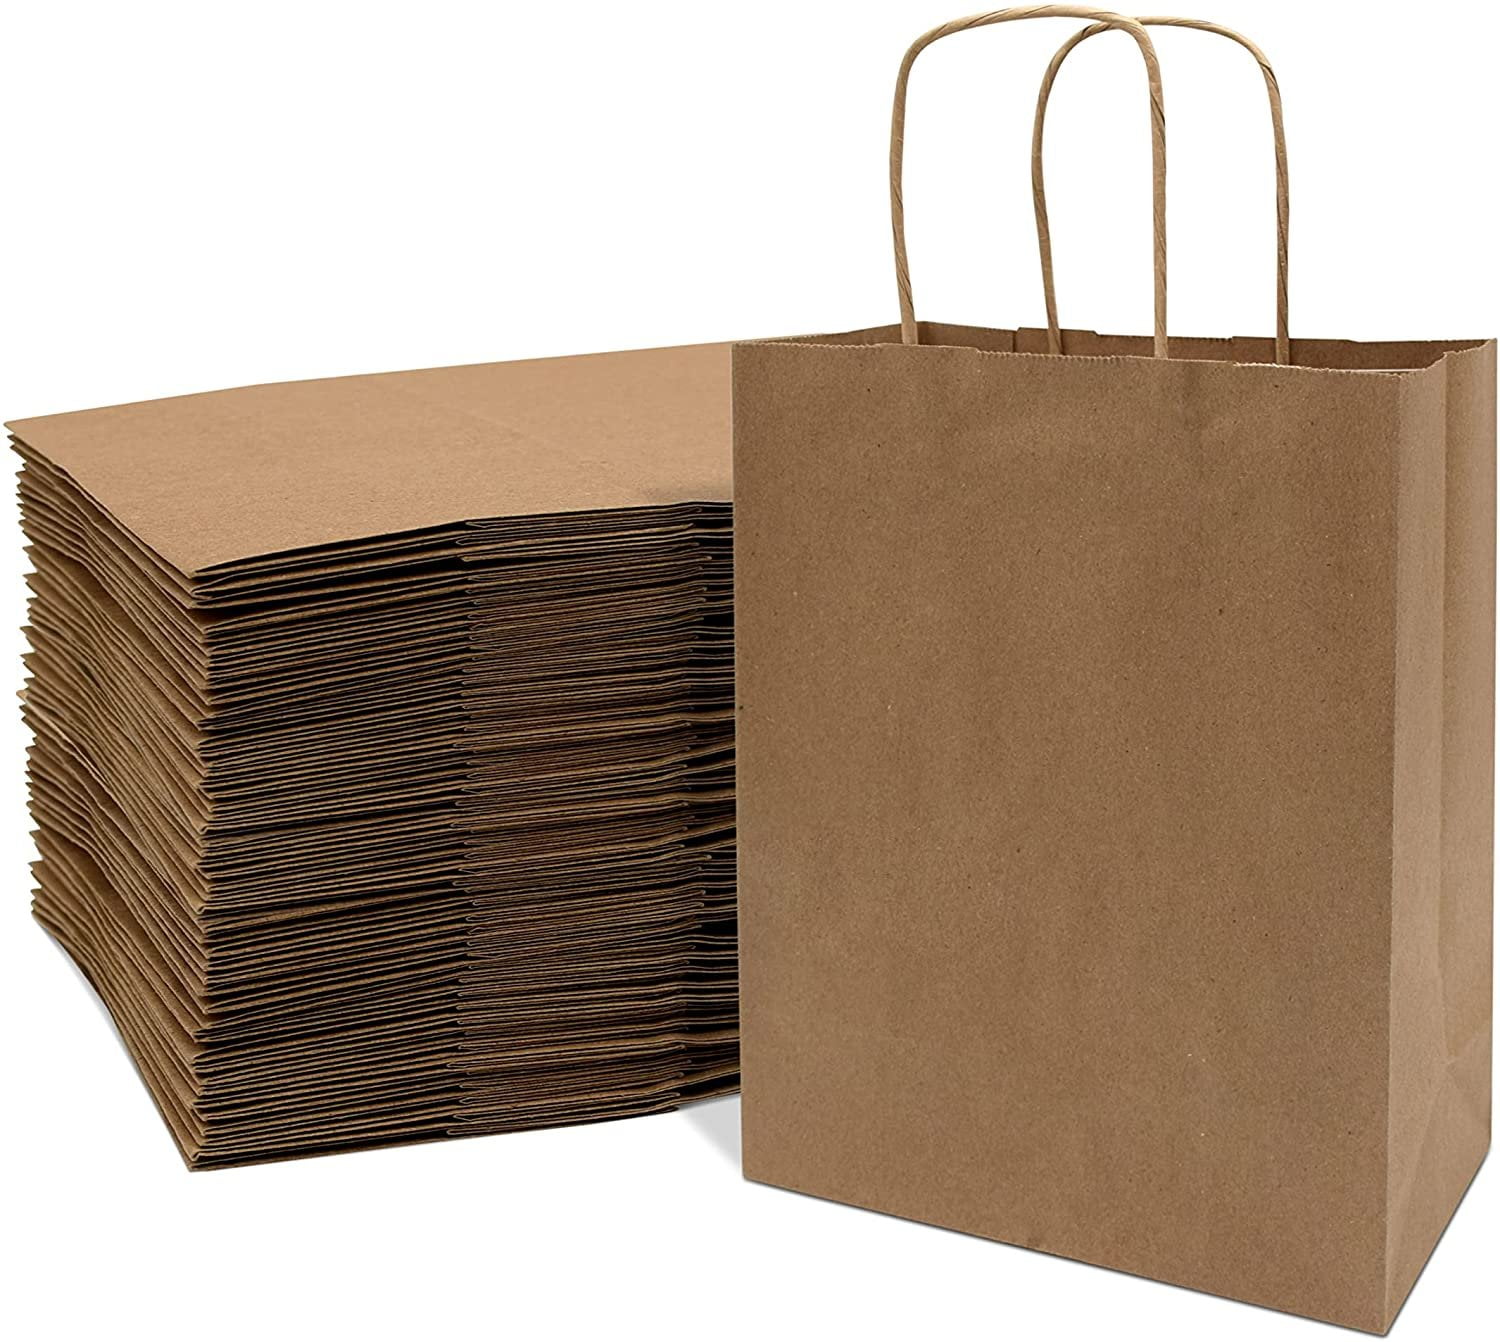 8x4x10" Medium BROWN PAPER CARRIER BAGS with HANDLES Sandwich/Lunch/Food/Fruit 